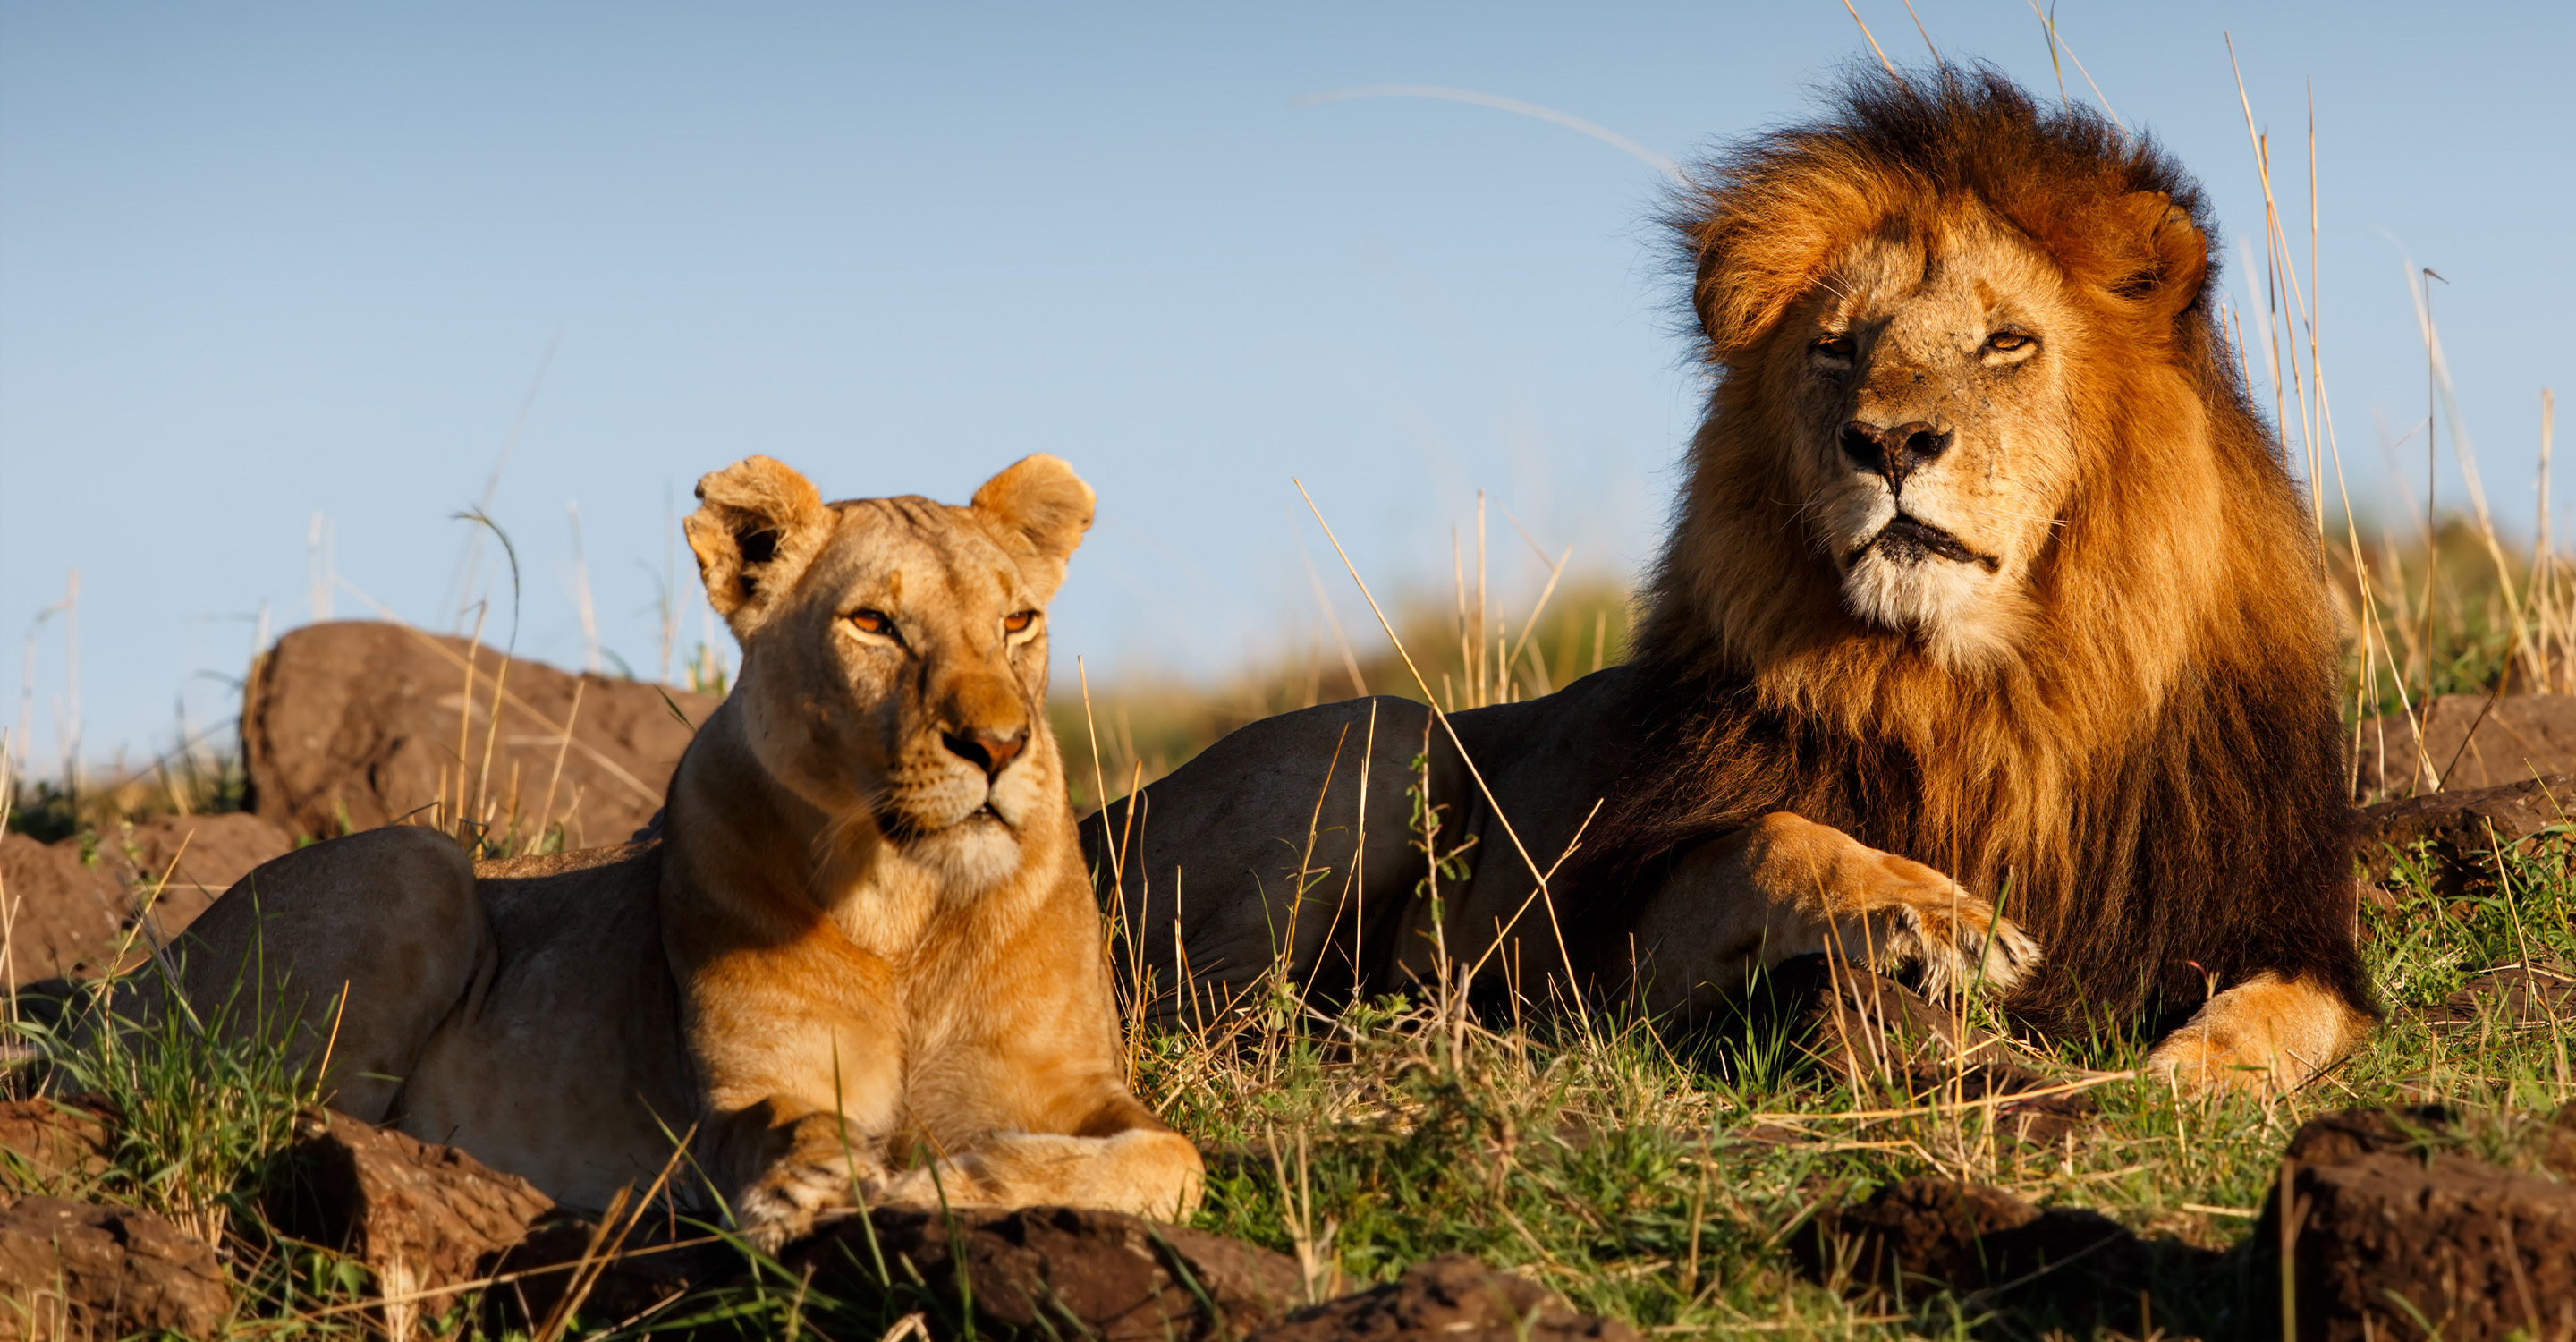 An African lion and lioness rest together, Ol Pejeta Conservancy, Laikipia, Kenya